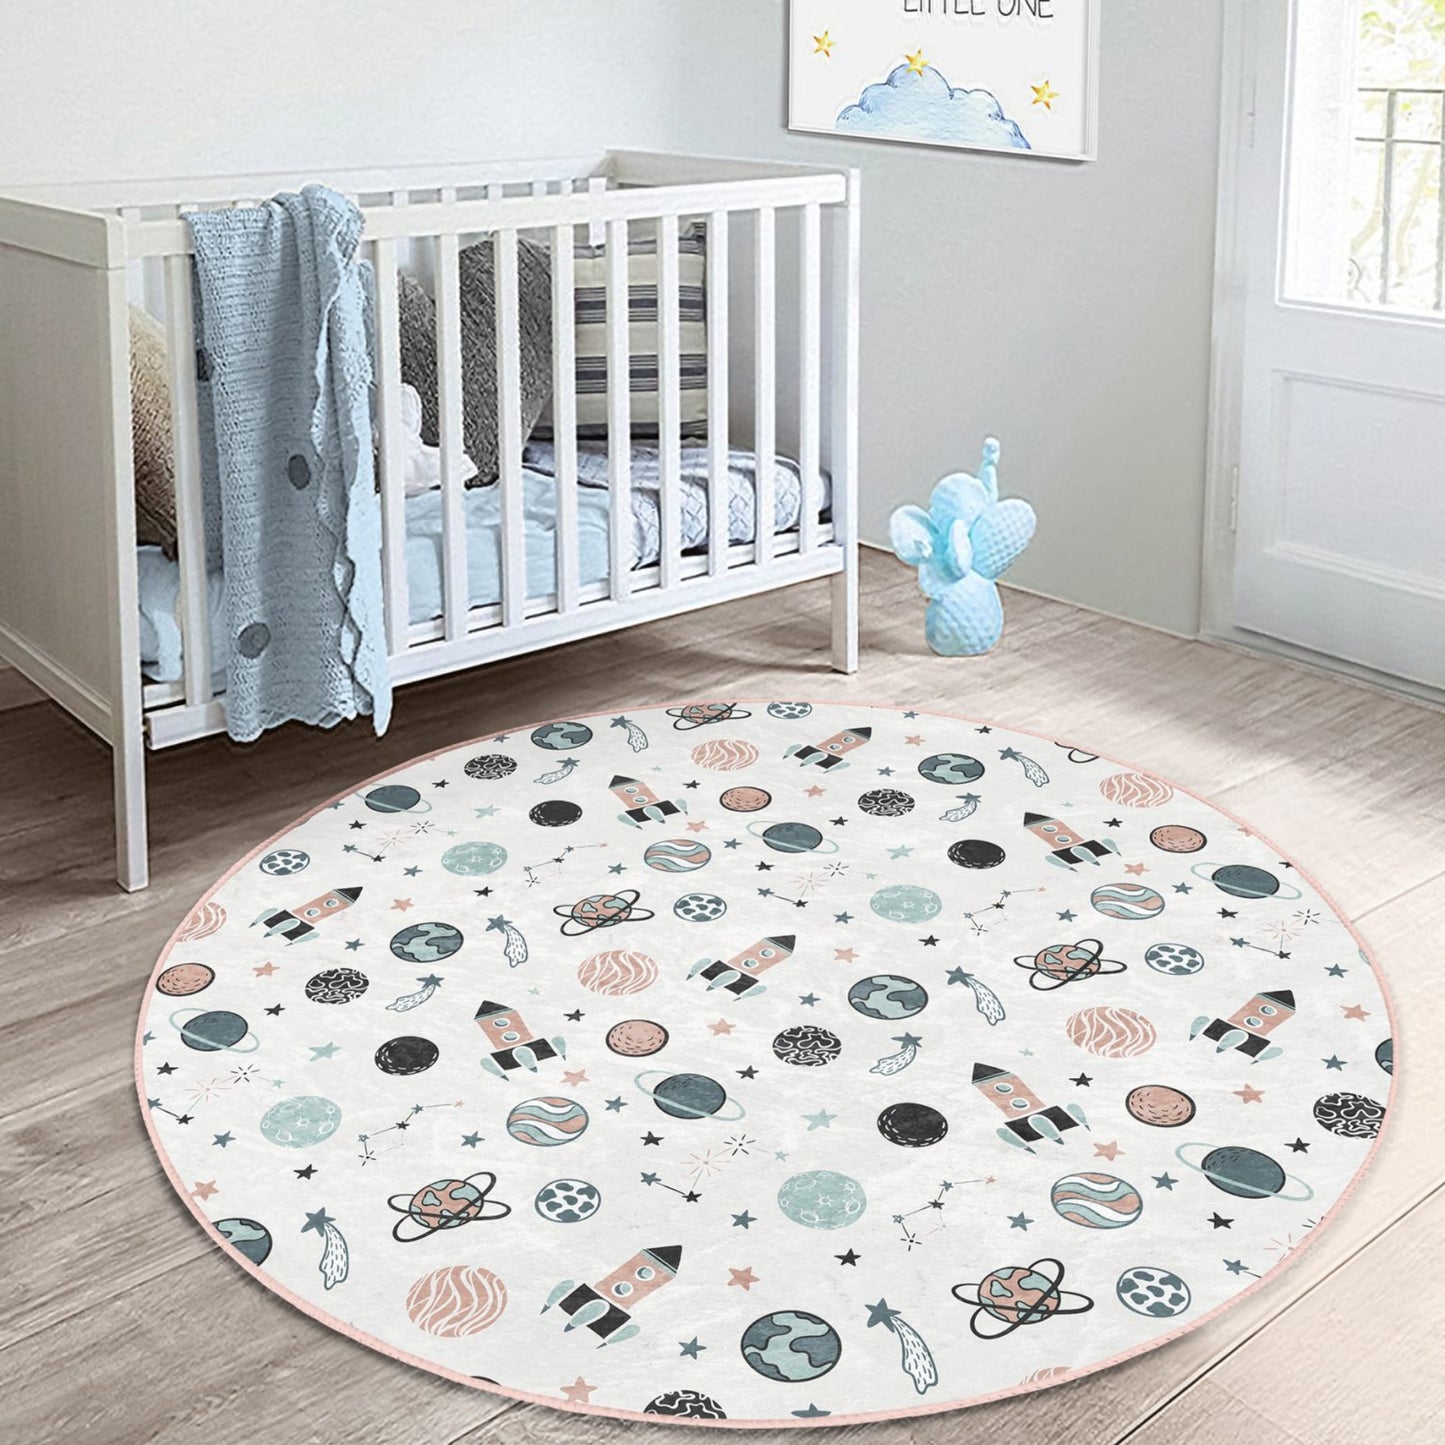 Rug with Whimsical Rocket and Planets Illustrations